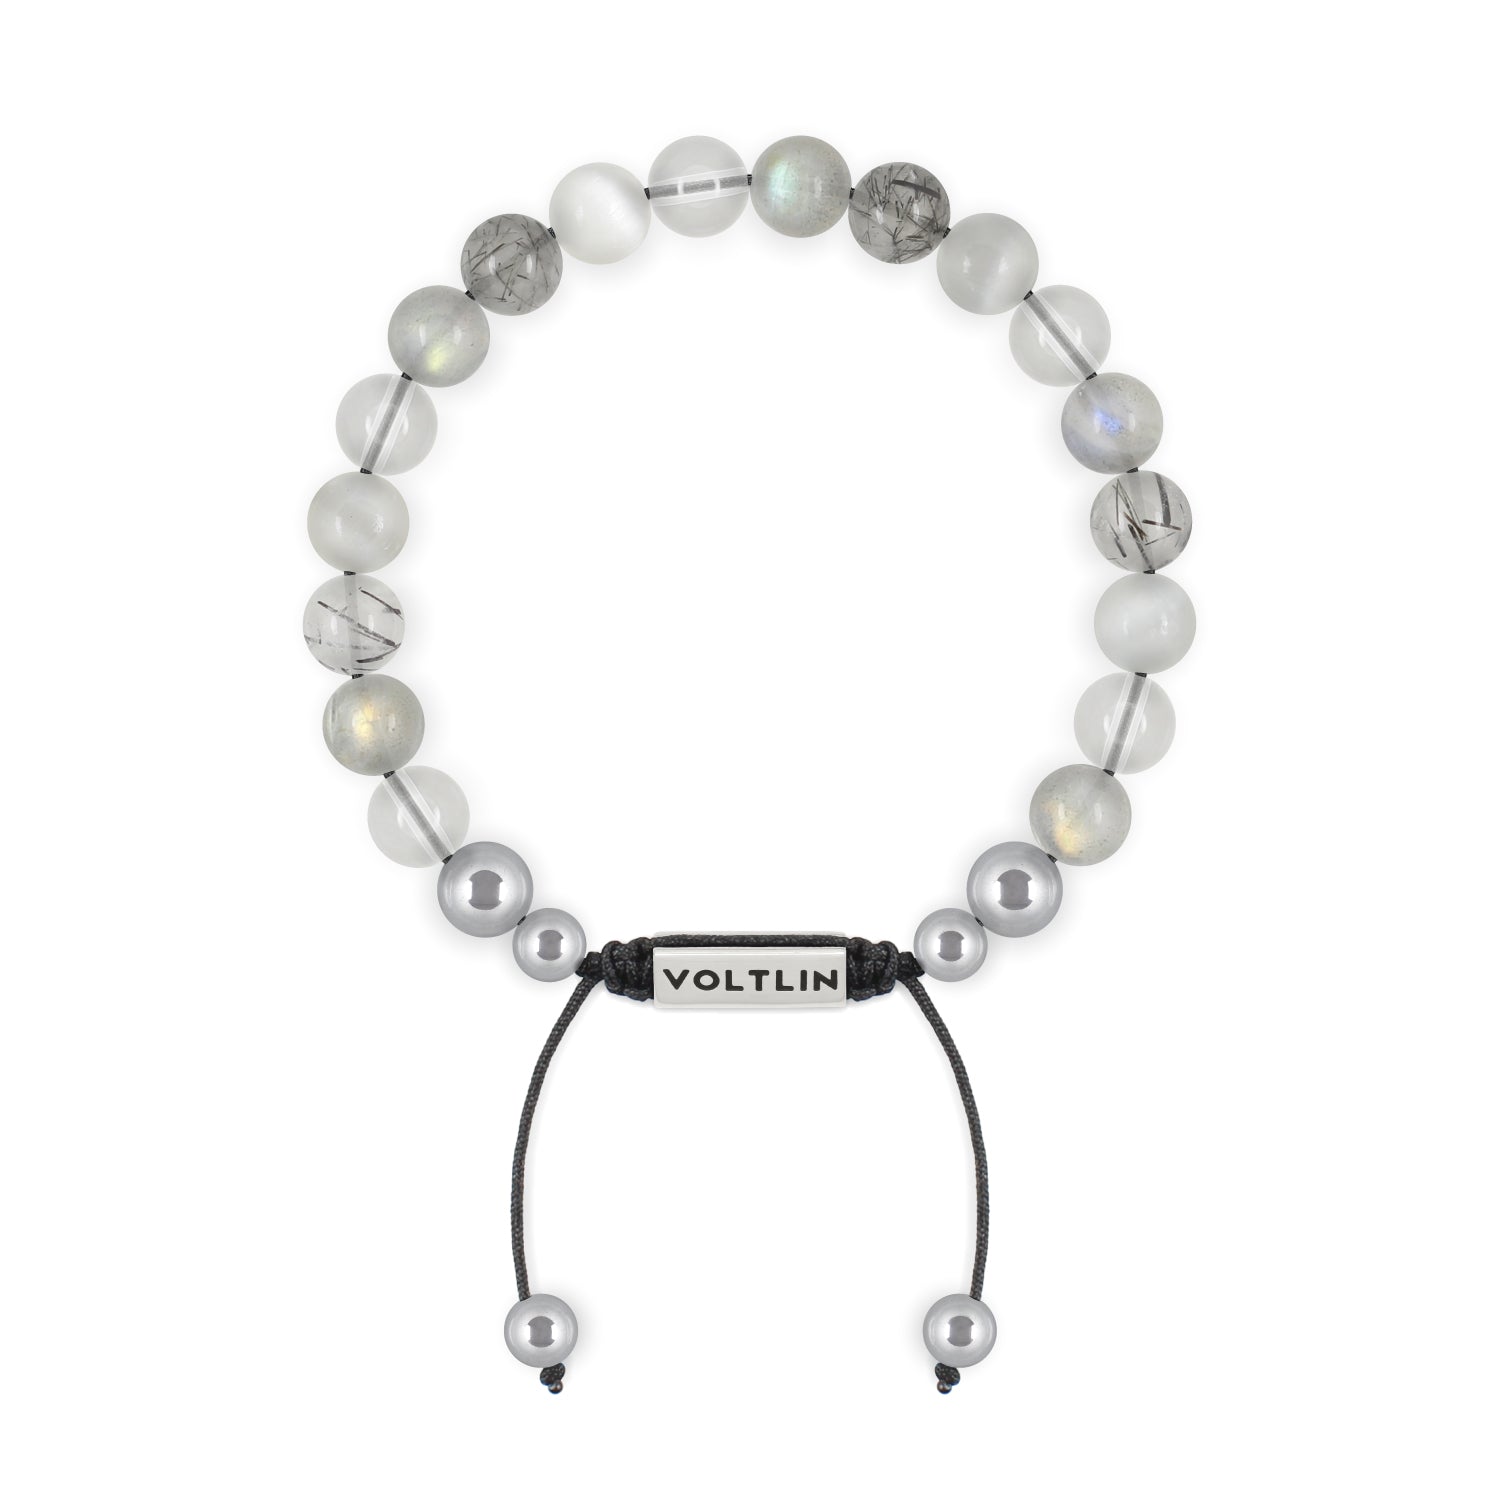 Front view of an 8mm Crown Chakra beaded shamballa bracelet featuring Quartz, Labradorite, Tourmalinated Quartz, & Selenite crystal and silver stainless steel logo bead made by Voltlin